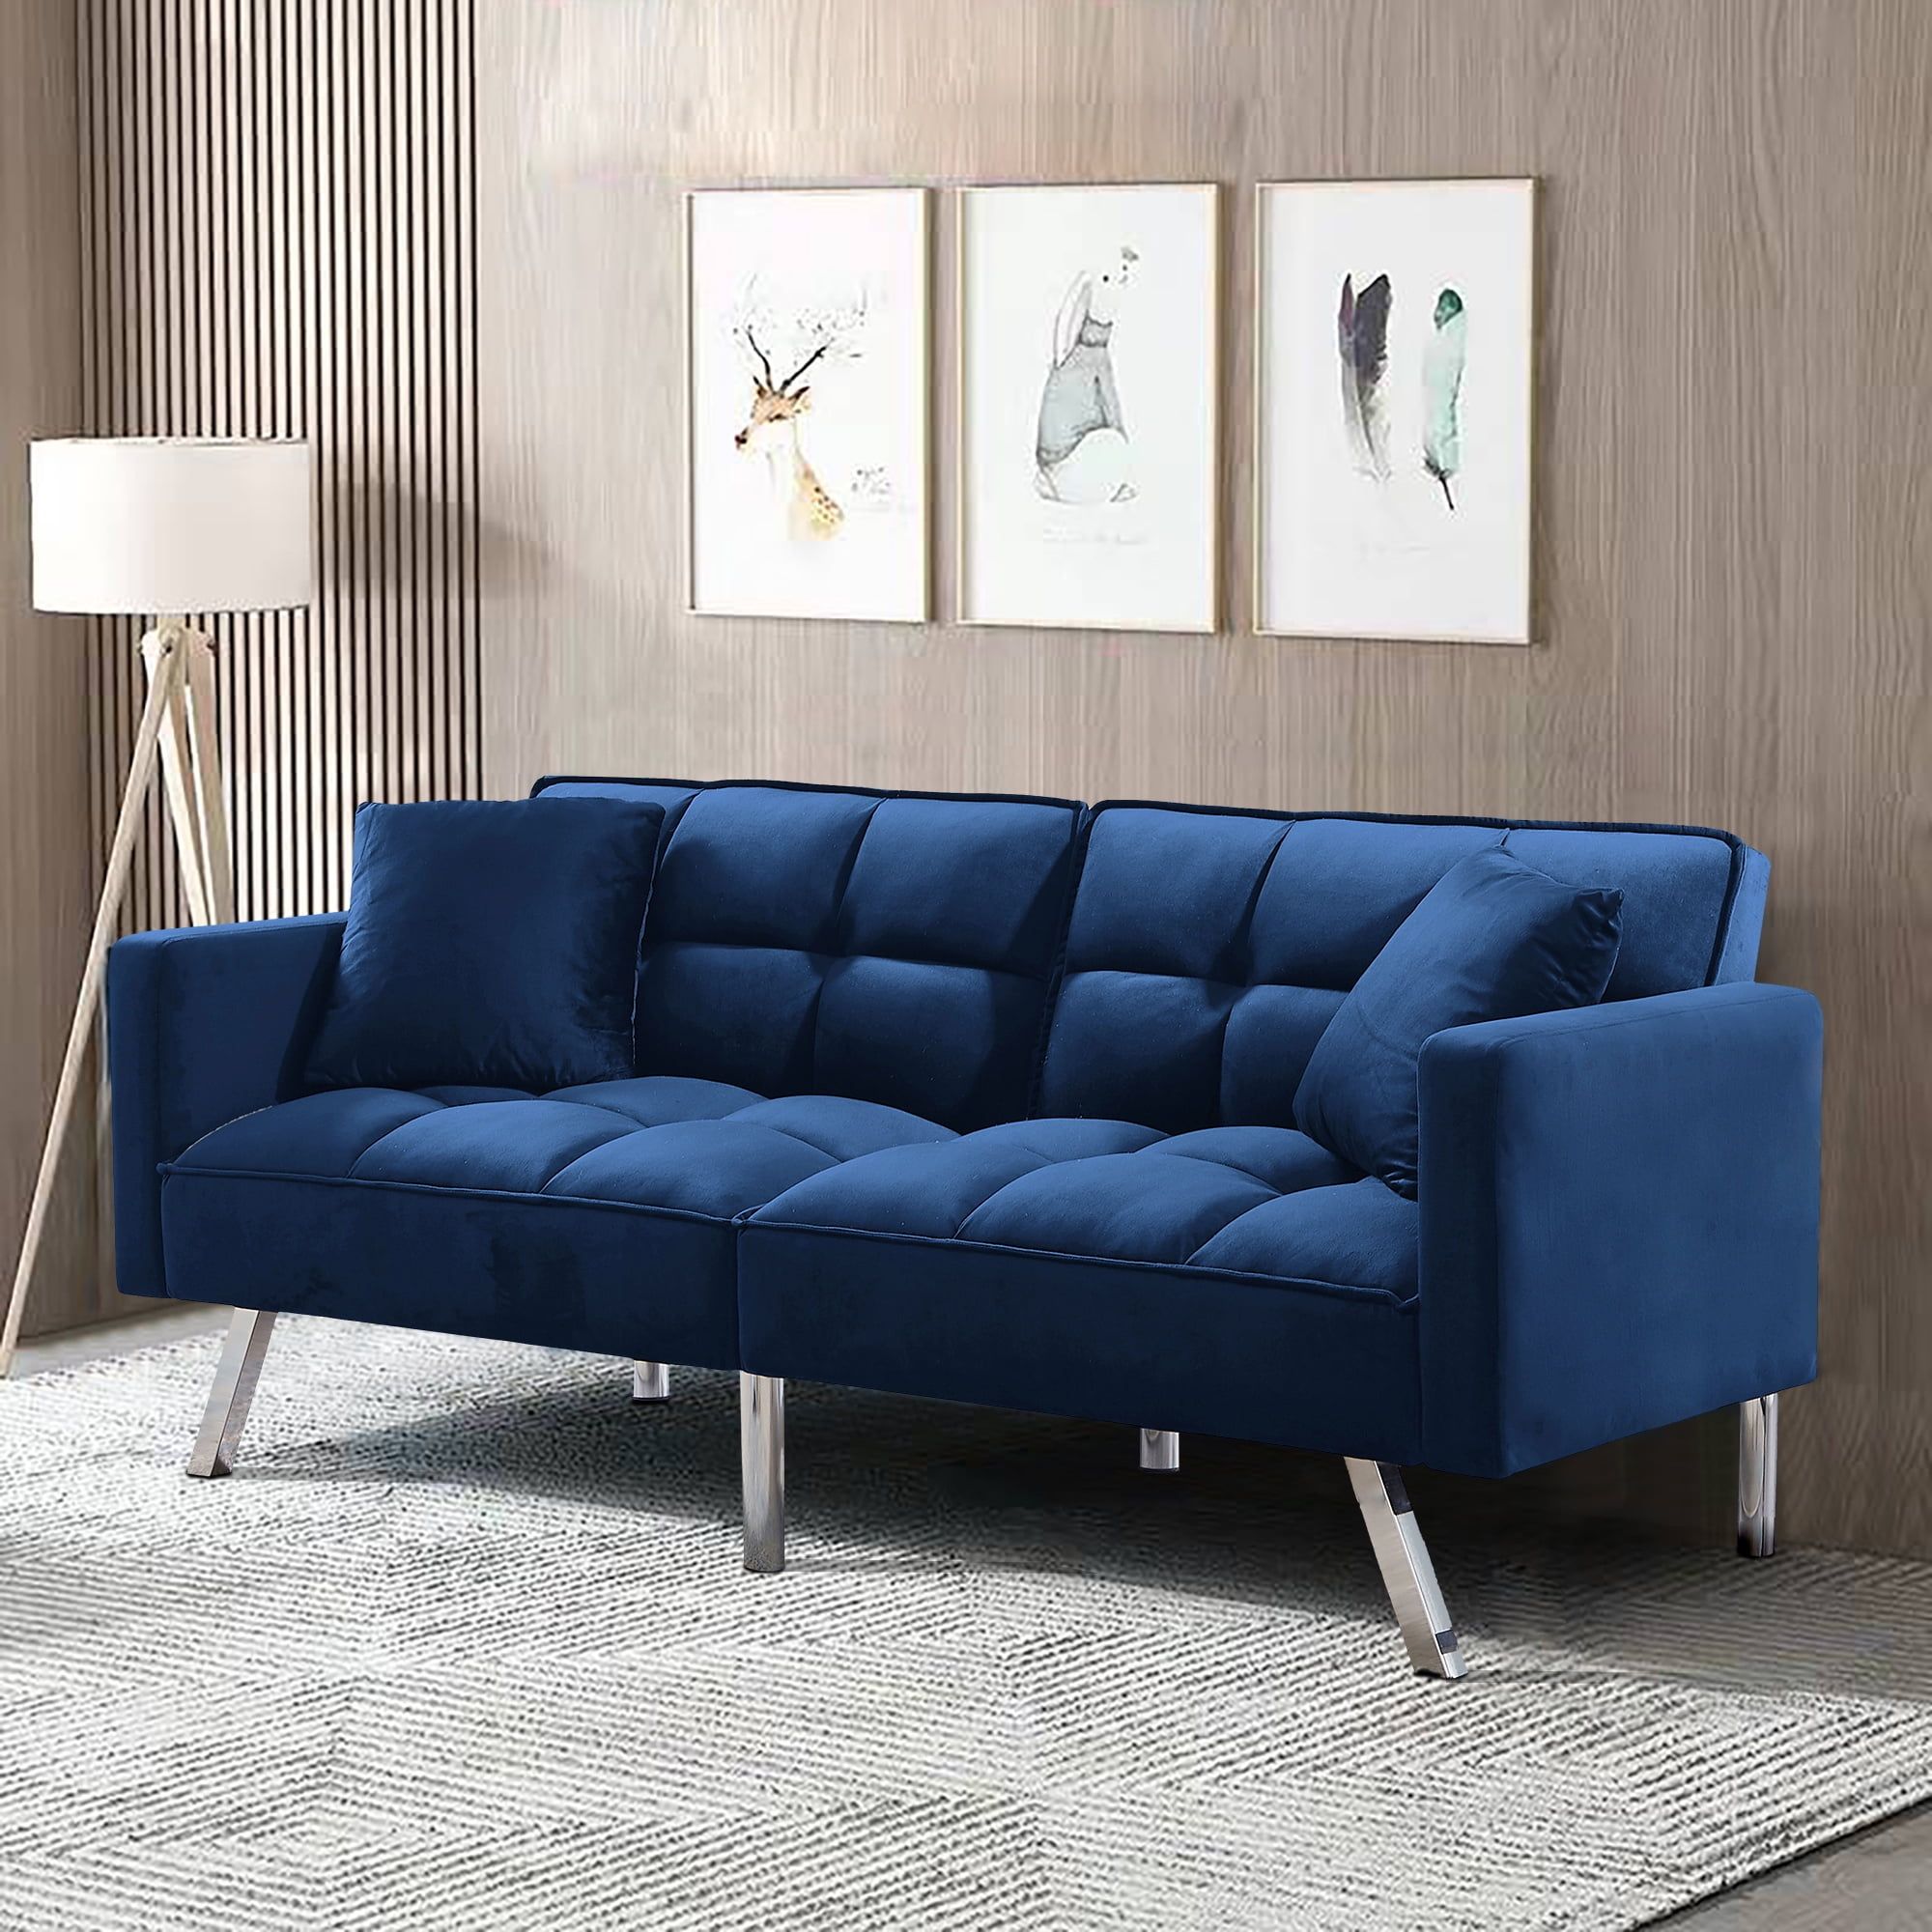 Aukfa Futon Sofa Bed For Living Room, Adult Sleeper Sofa, 74'' Velvet Couch  With 2 Pillows  Navy Blue – Walmart Regarding Navy Sleeper Sofa Couches (View 4 of 15)